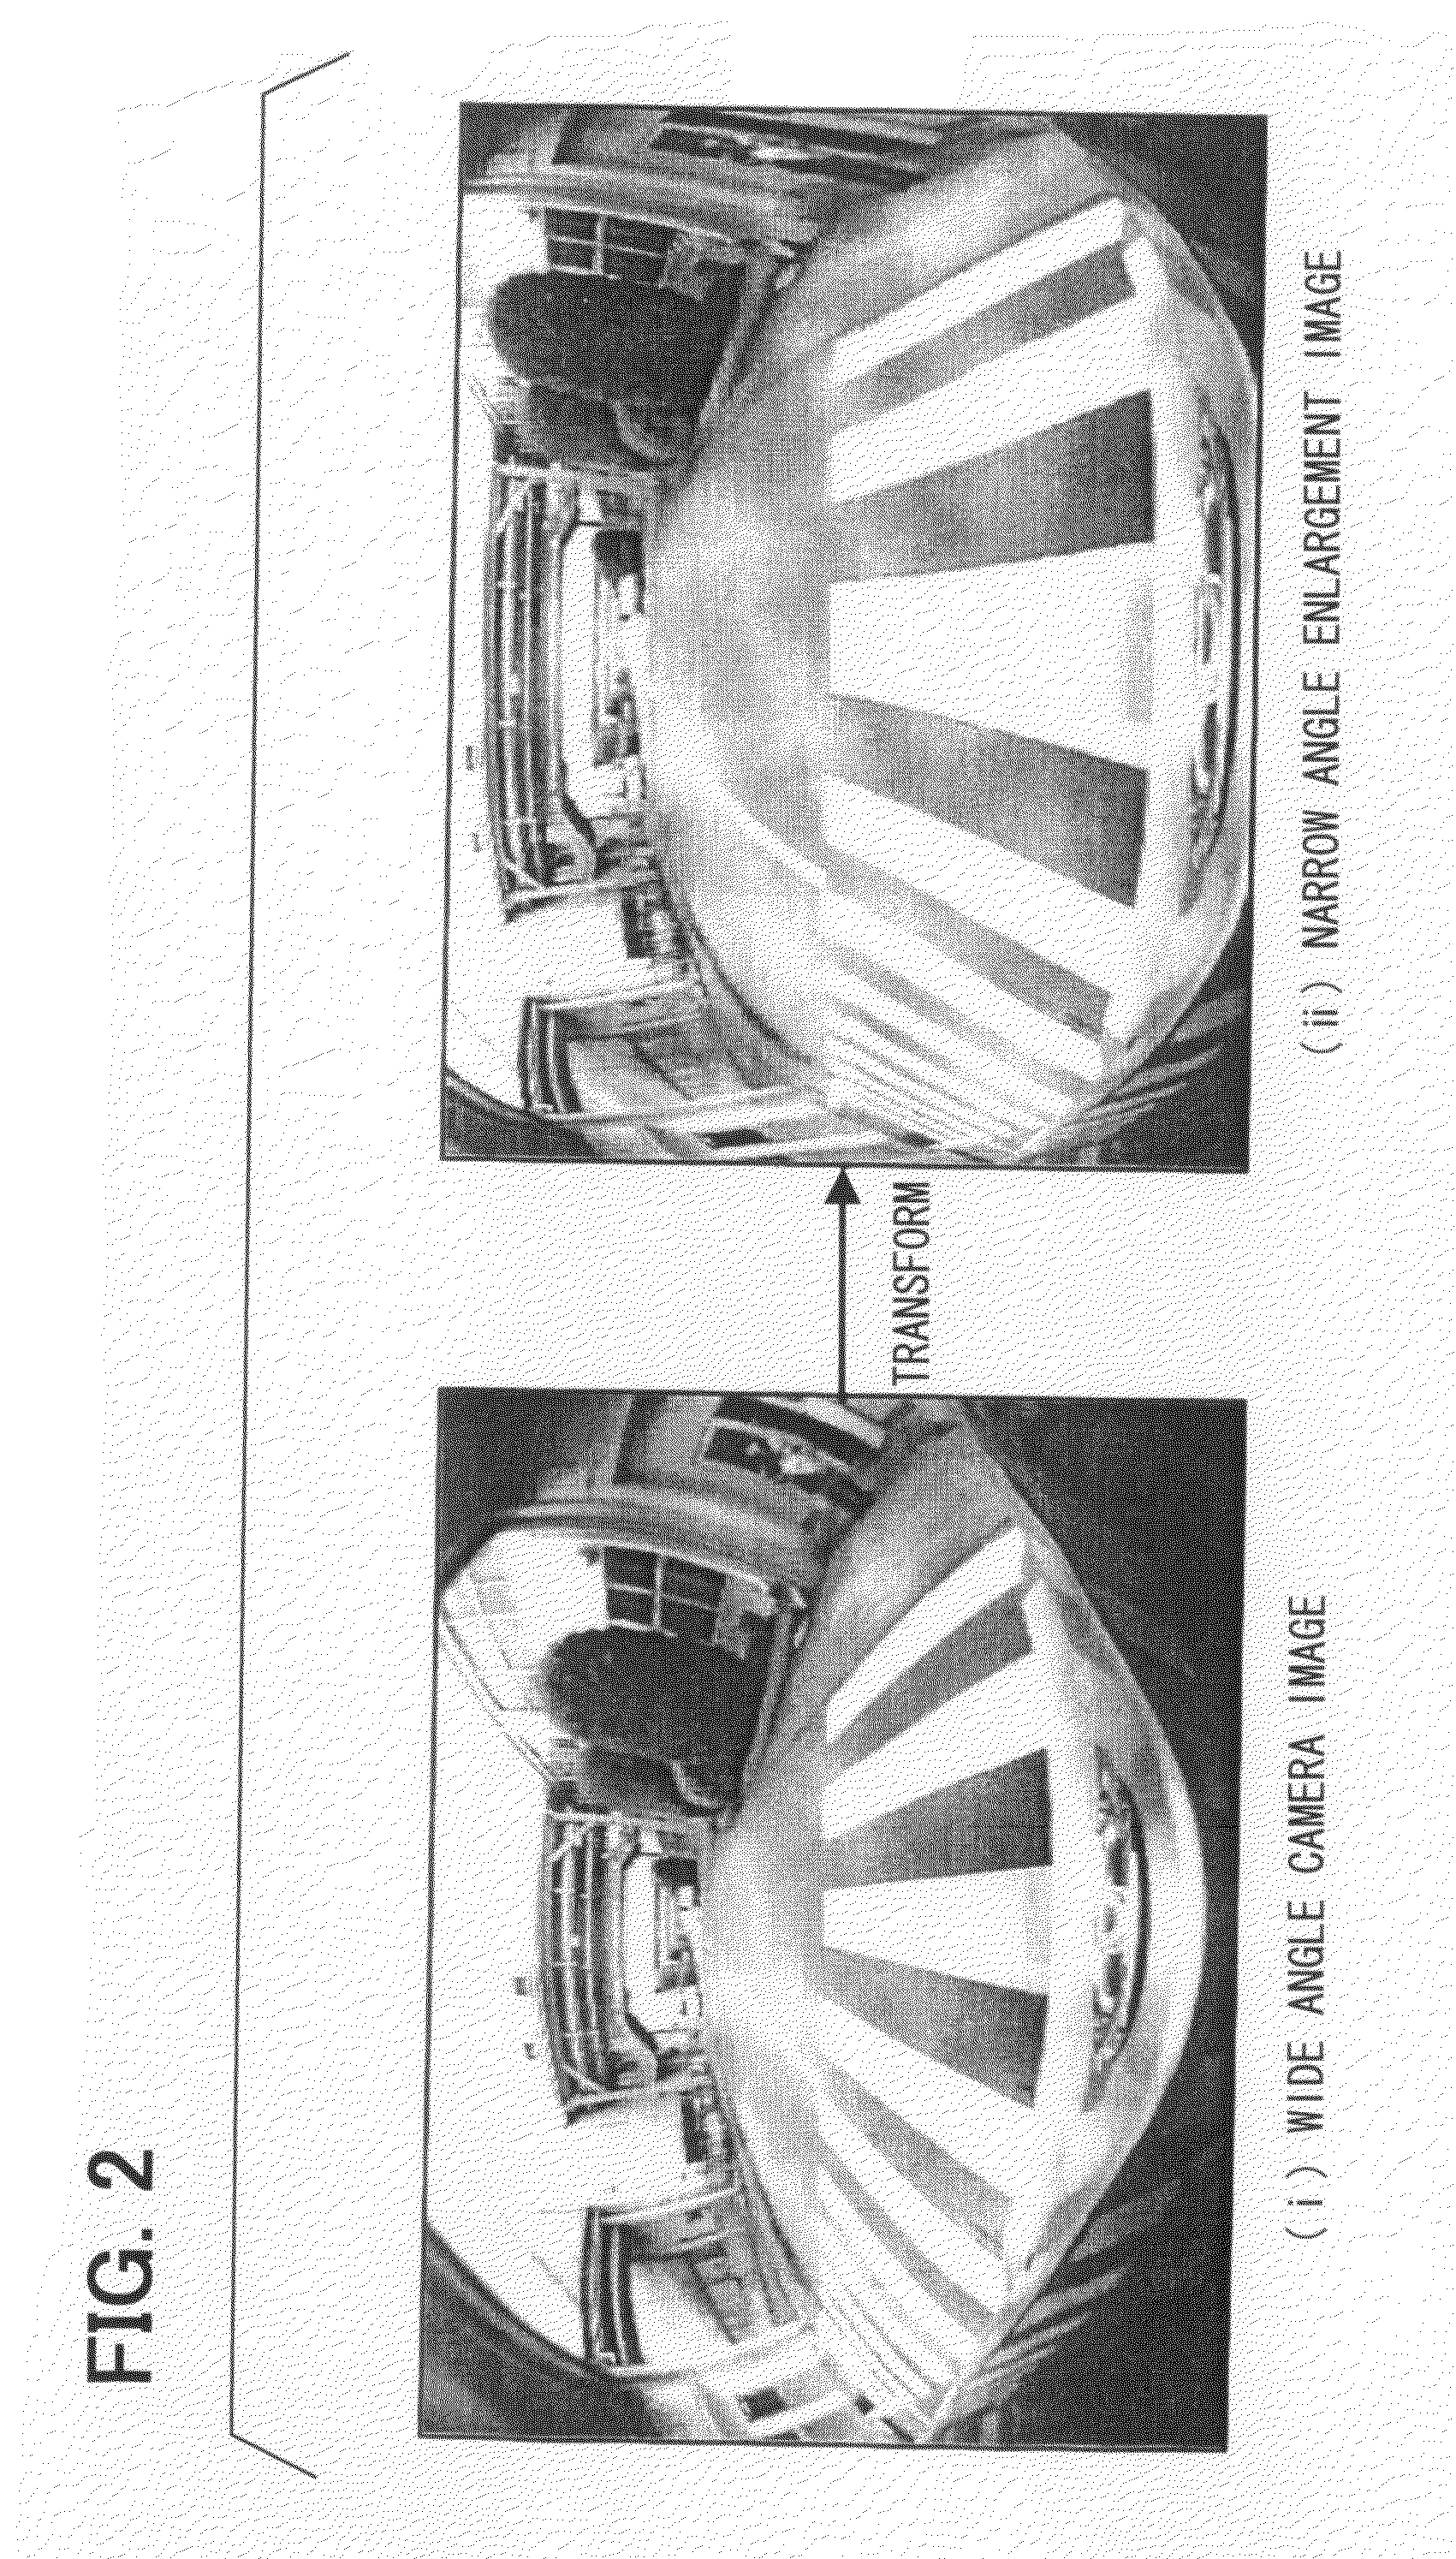 Image display apparatus and image display system for vehicle